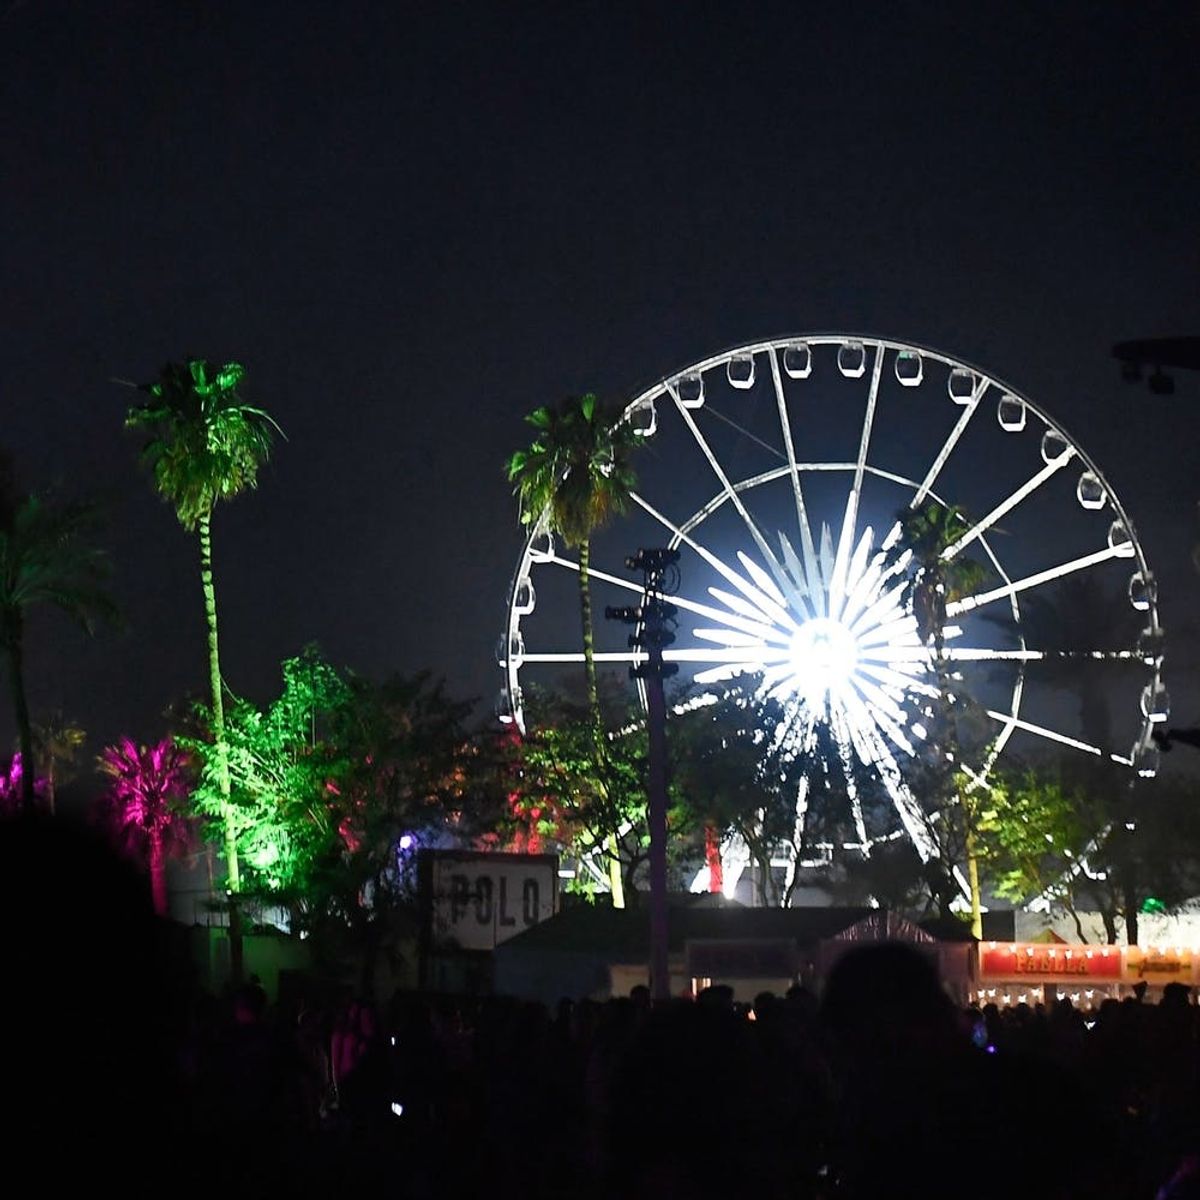 Instagram Tips and Tricks to Make the Most of Your #Coachella Experience